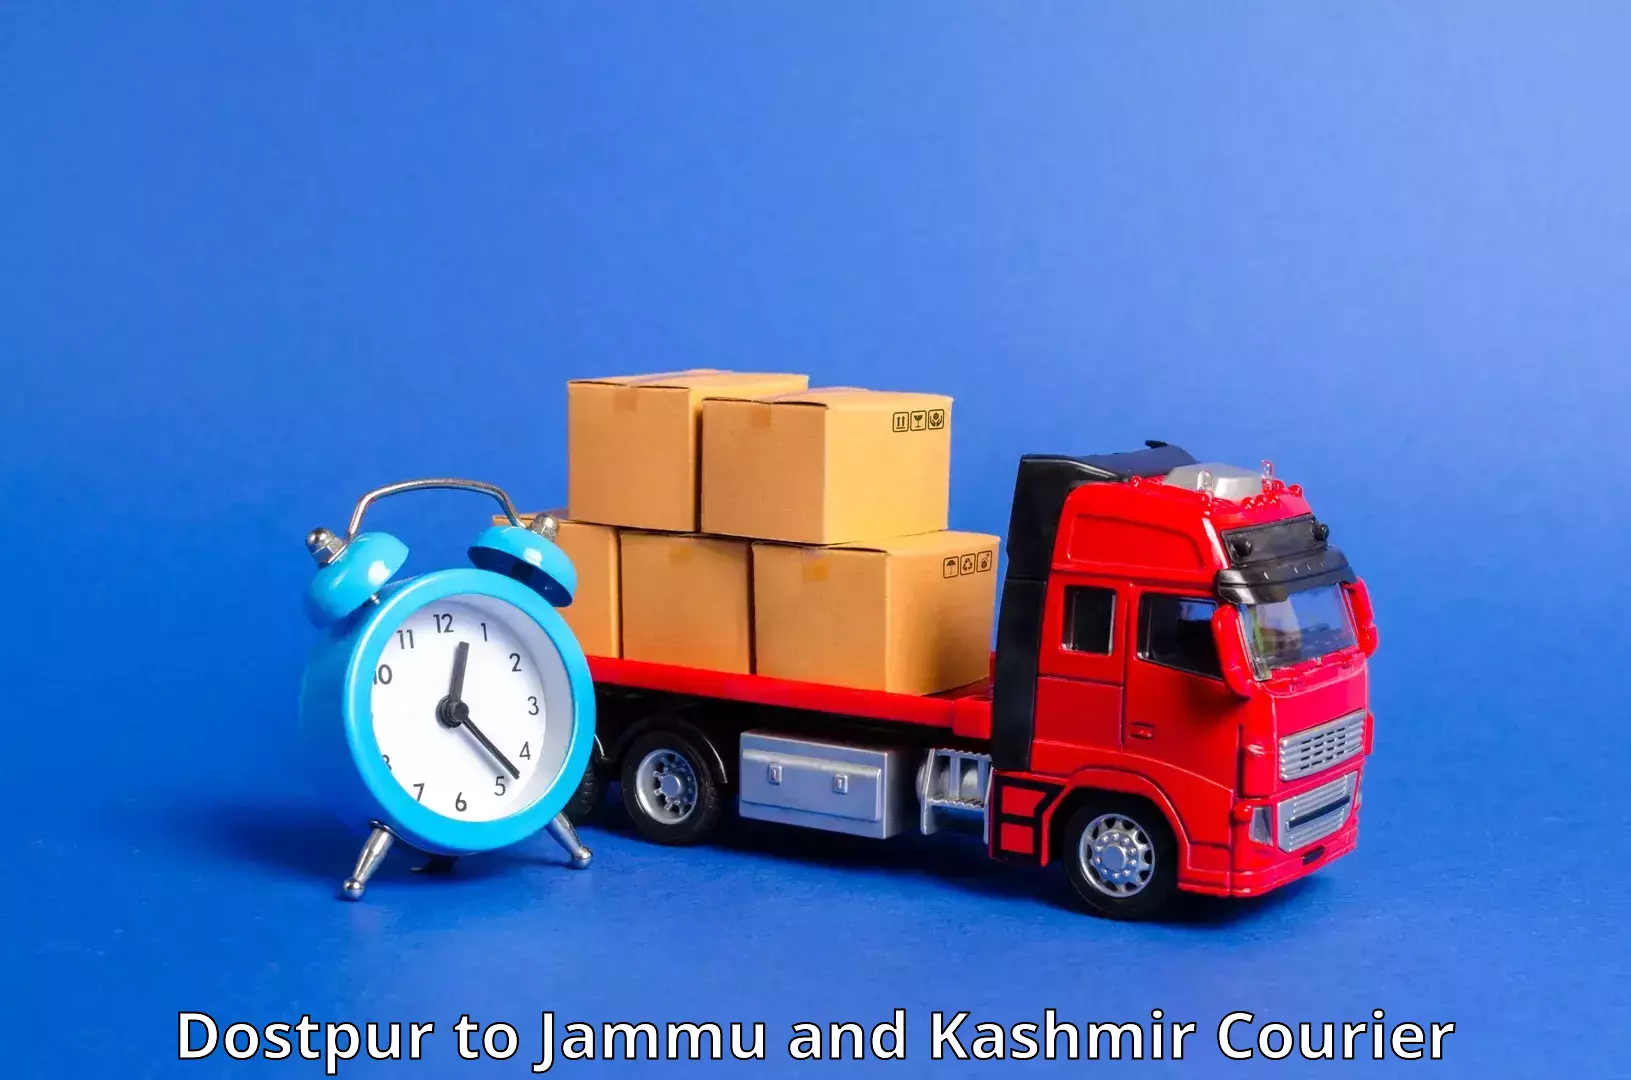 Round-the-clock parcel delivery Dostpur to Pulwama